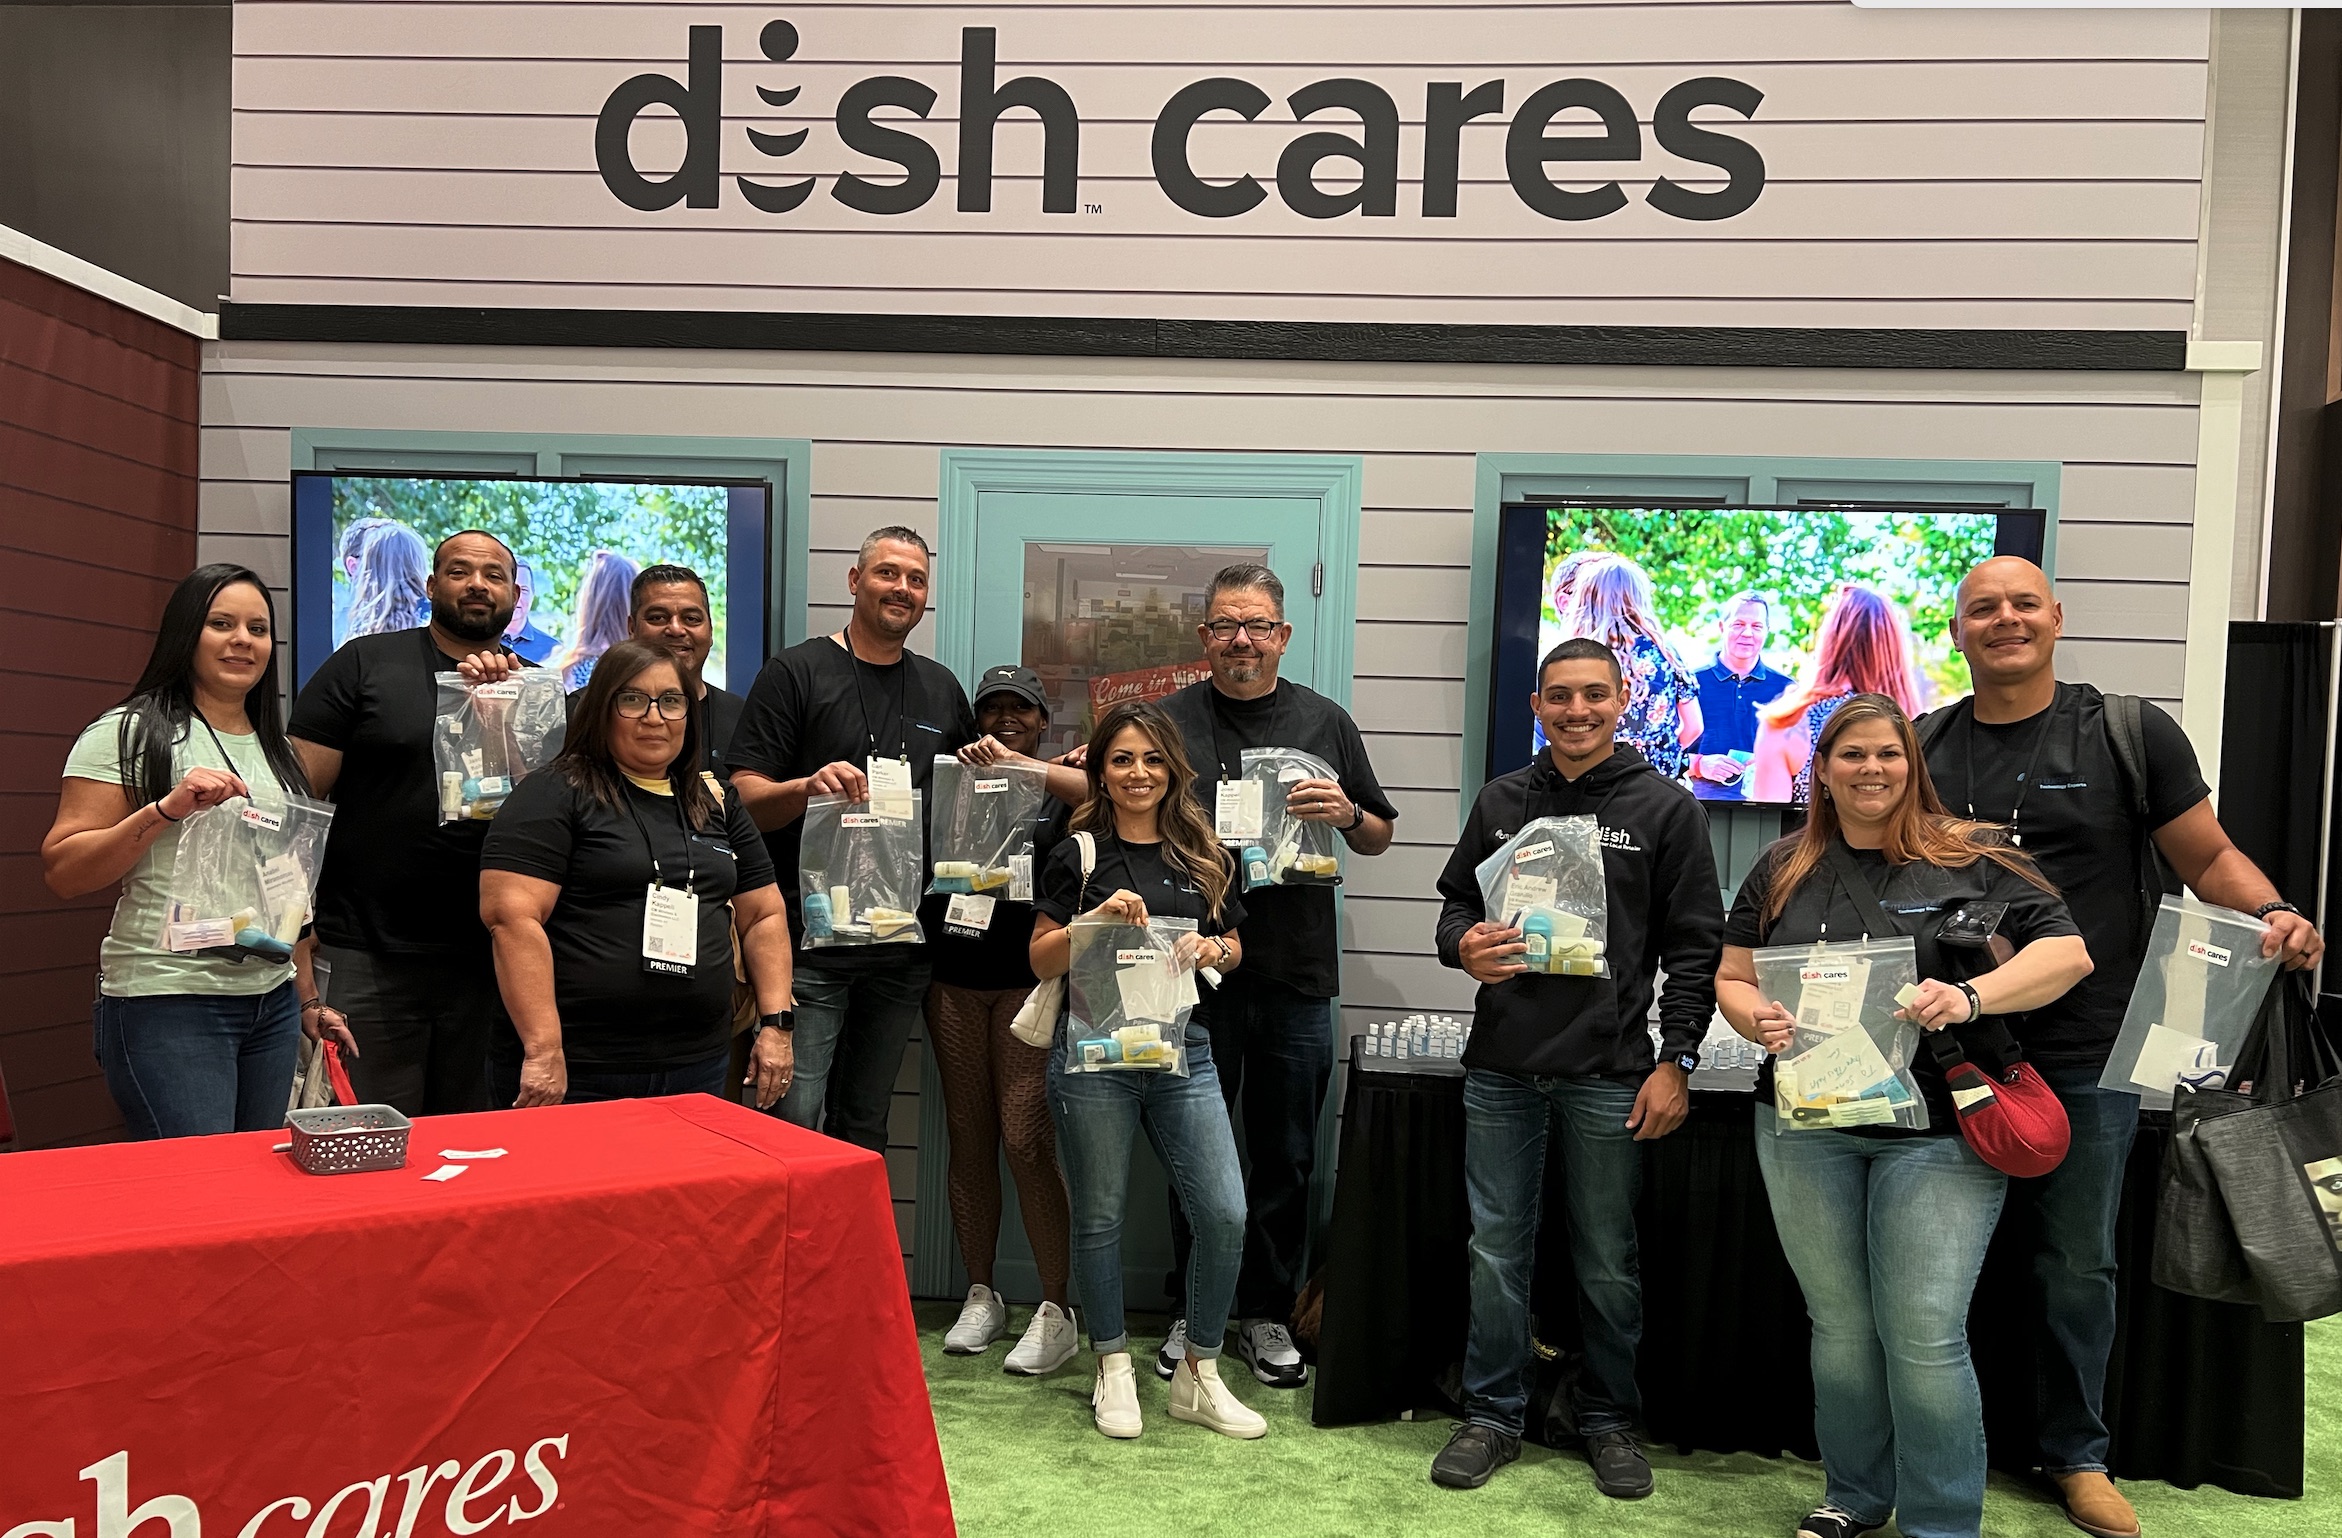 DISH Cares - Retailers Assembled Over 1,500 Hygiene Kits For Individuals In Need.